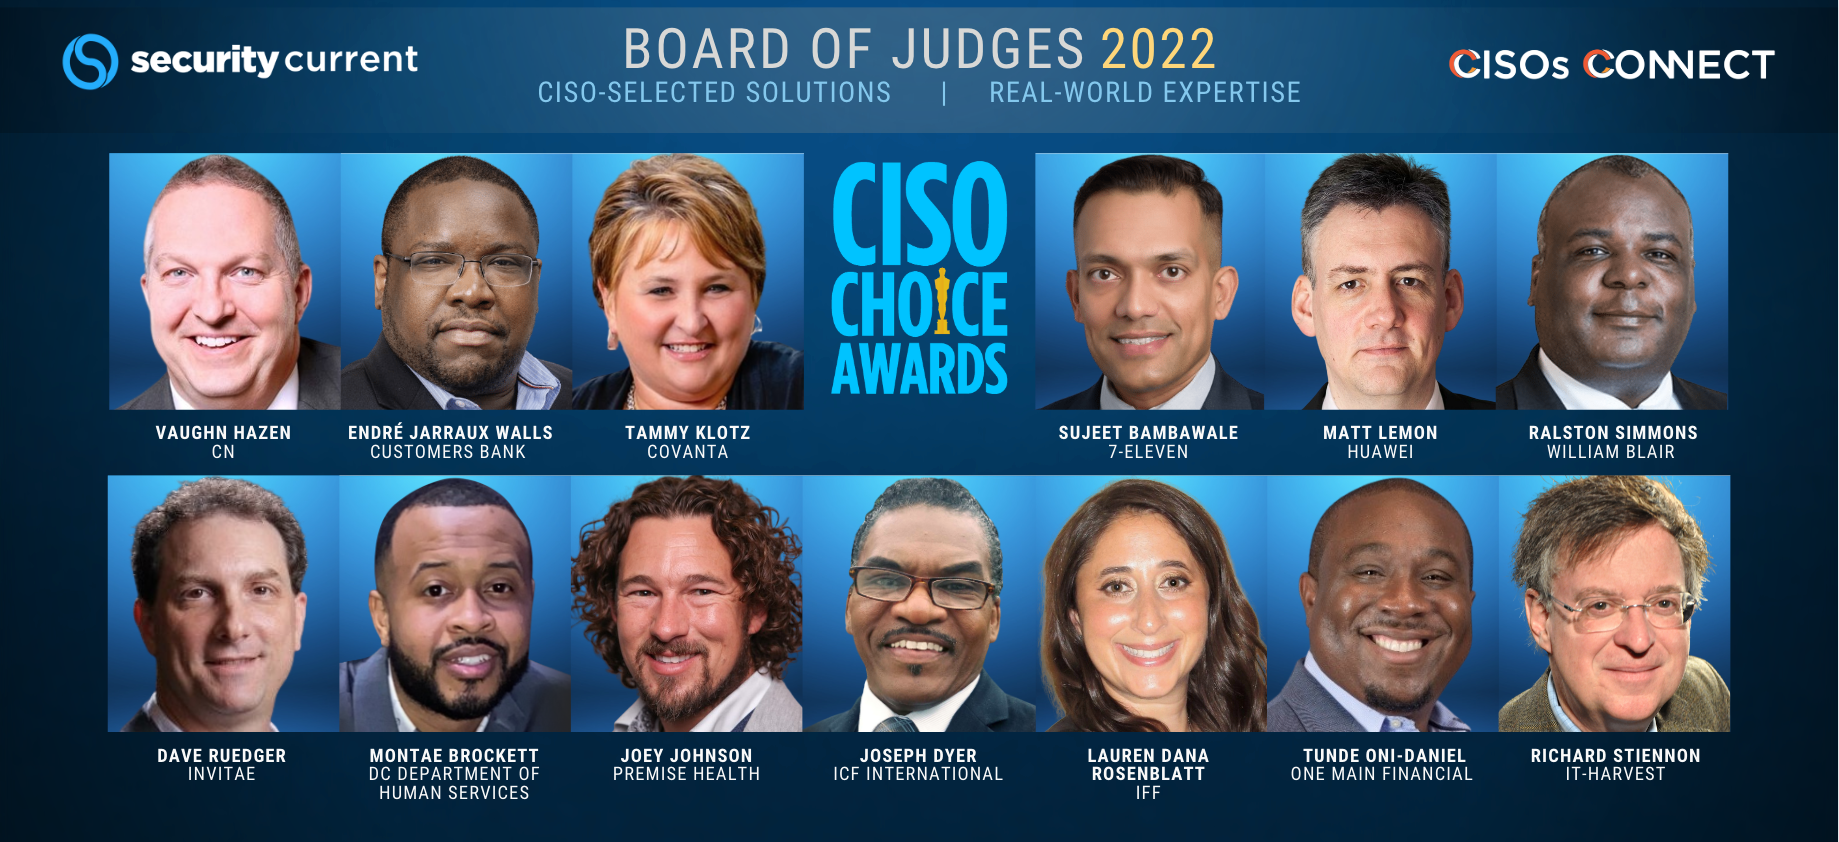 2022 CISO Choice Awards Board of Judges Security Current